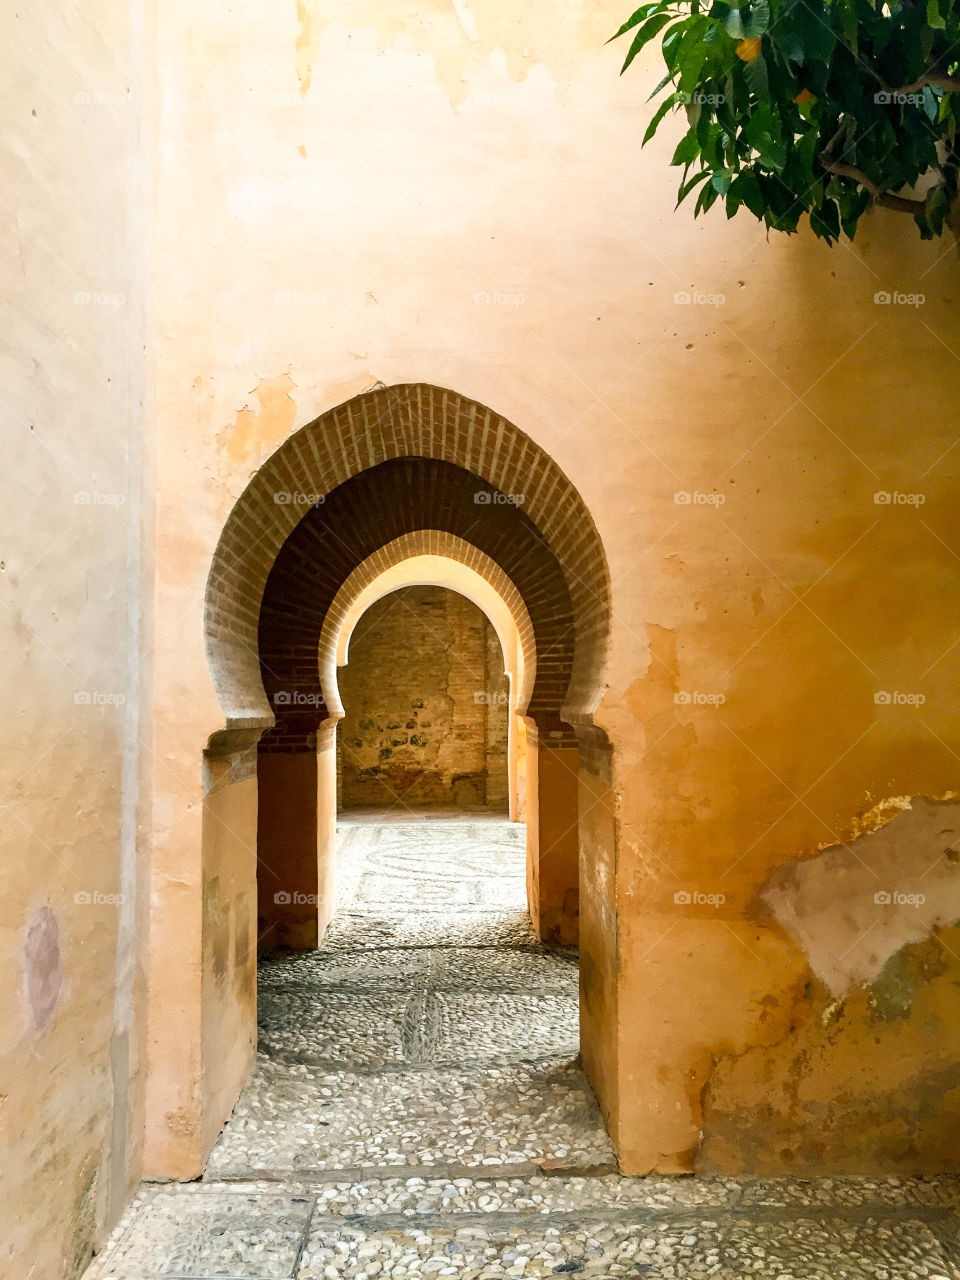 Moorish doorway and entrance to Alhambra palace in Spain featuring old rustic walls